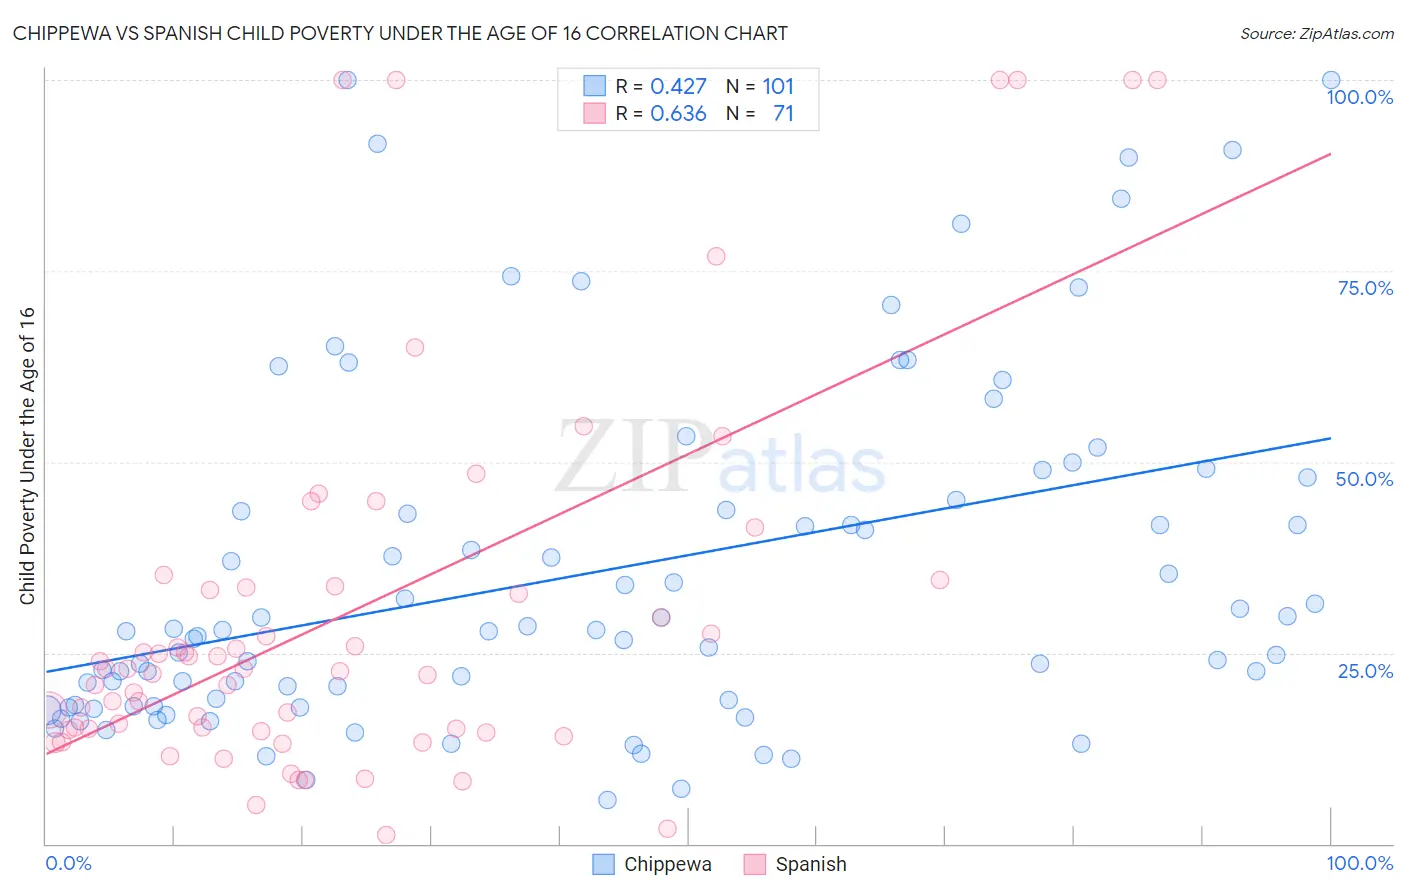 Chippewa vs Spanish Child Poverty Under the Age of 16